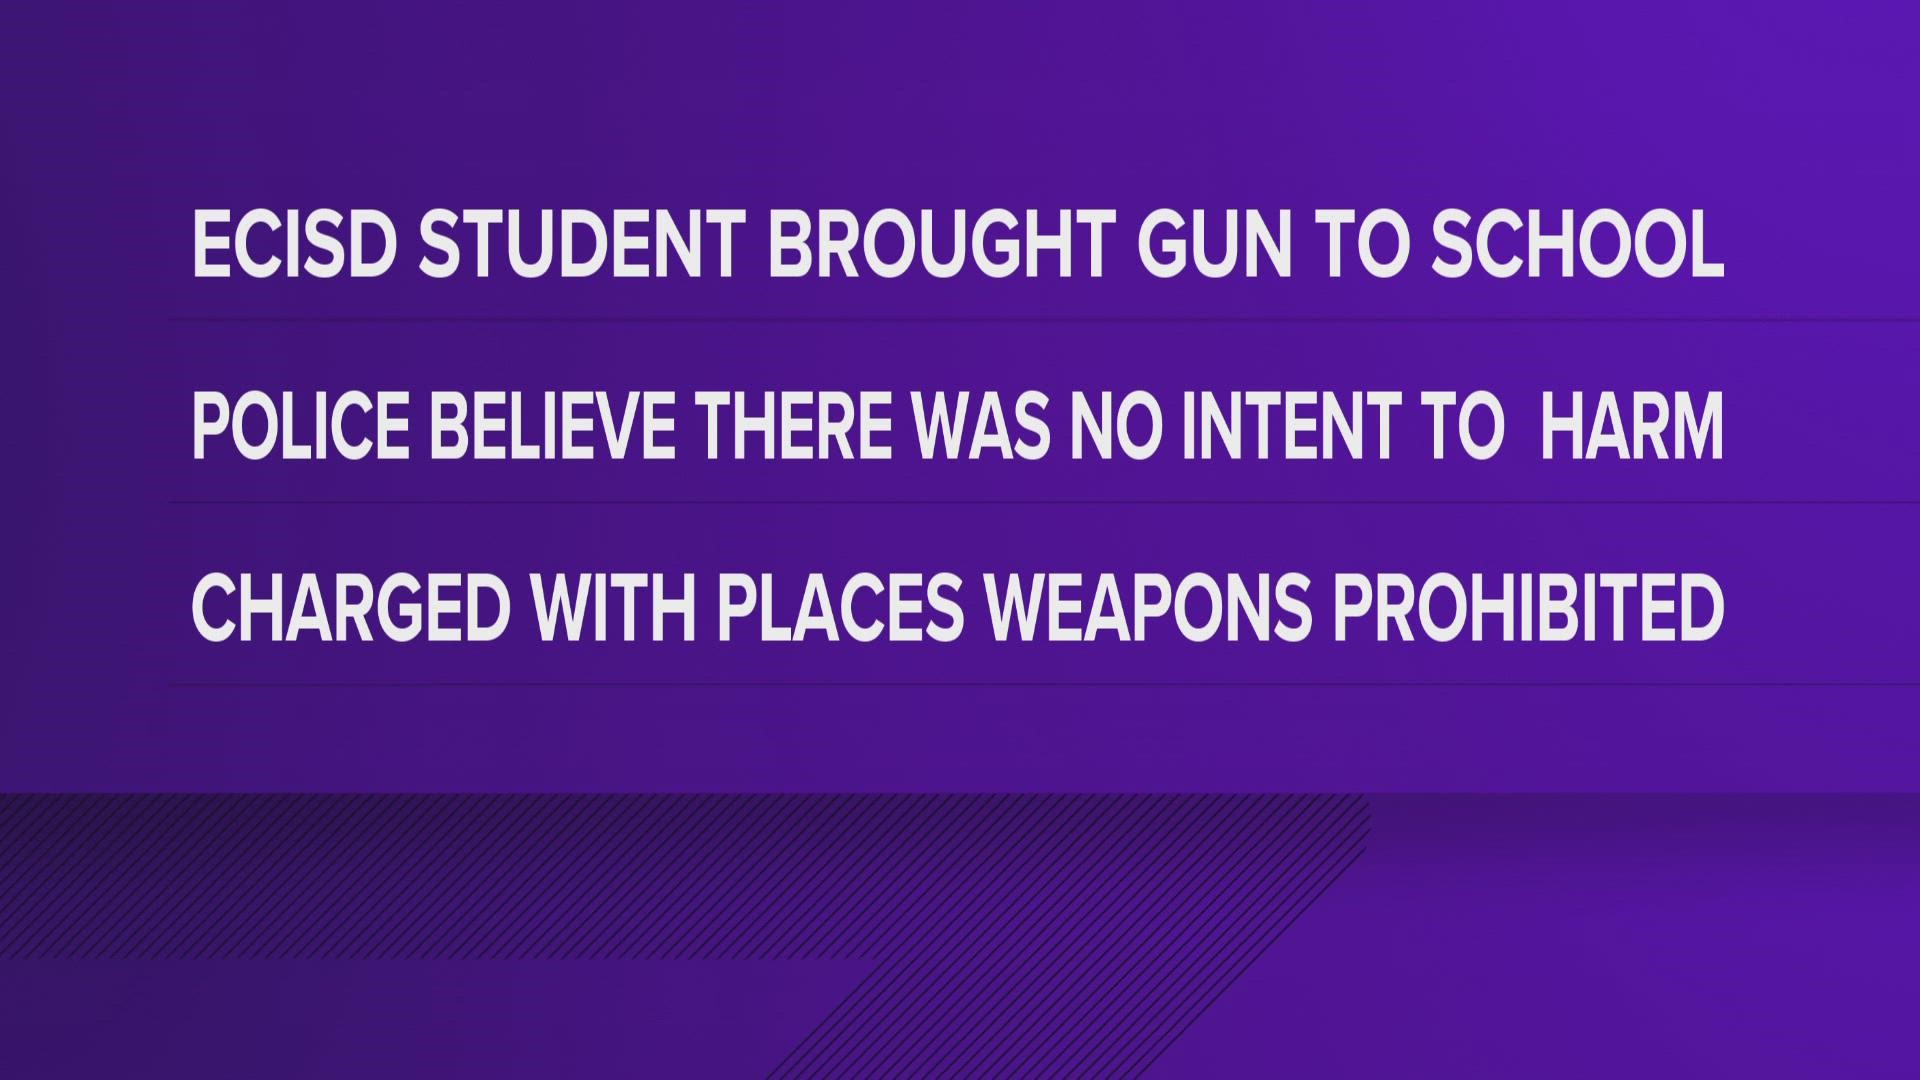 Police said they believe he brought the weapon to show it off, but not to hurt anyone.